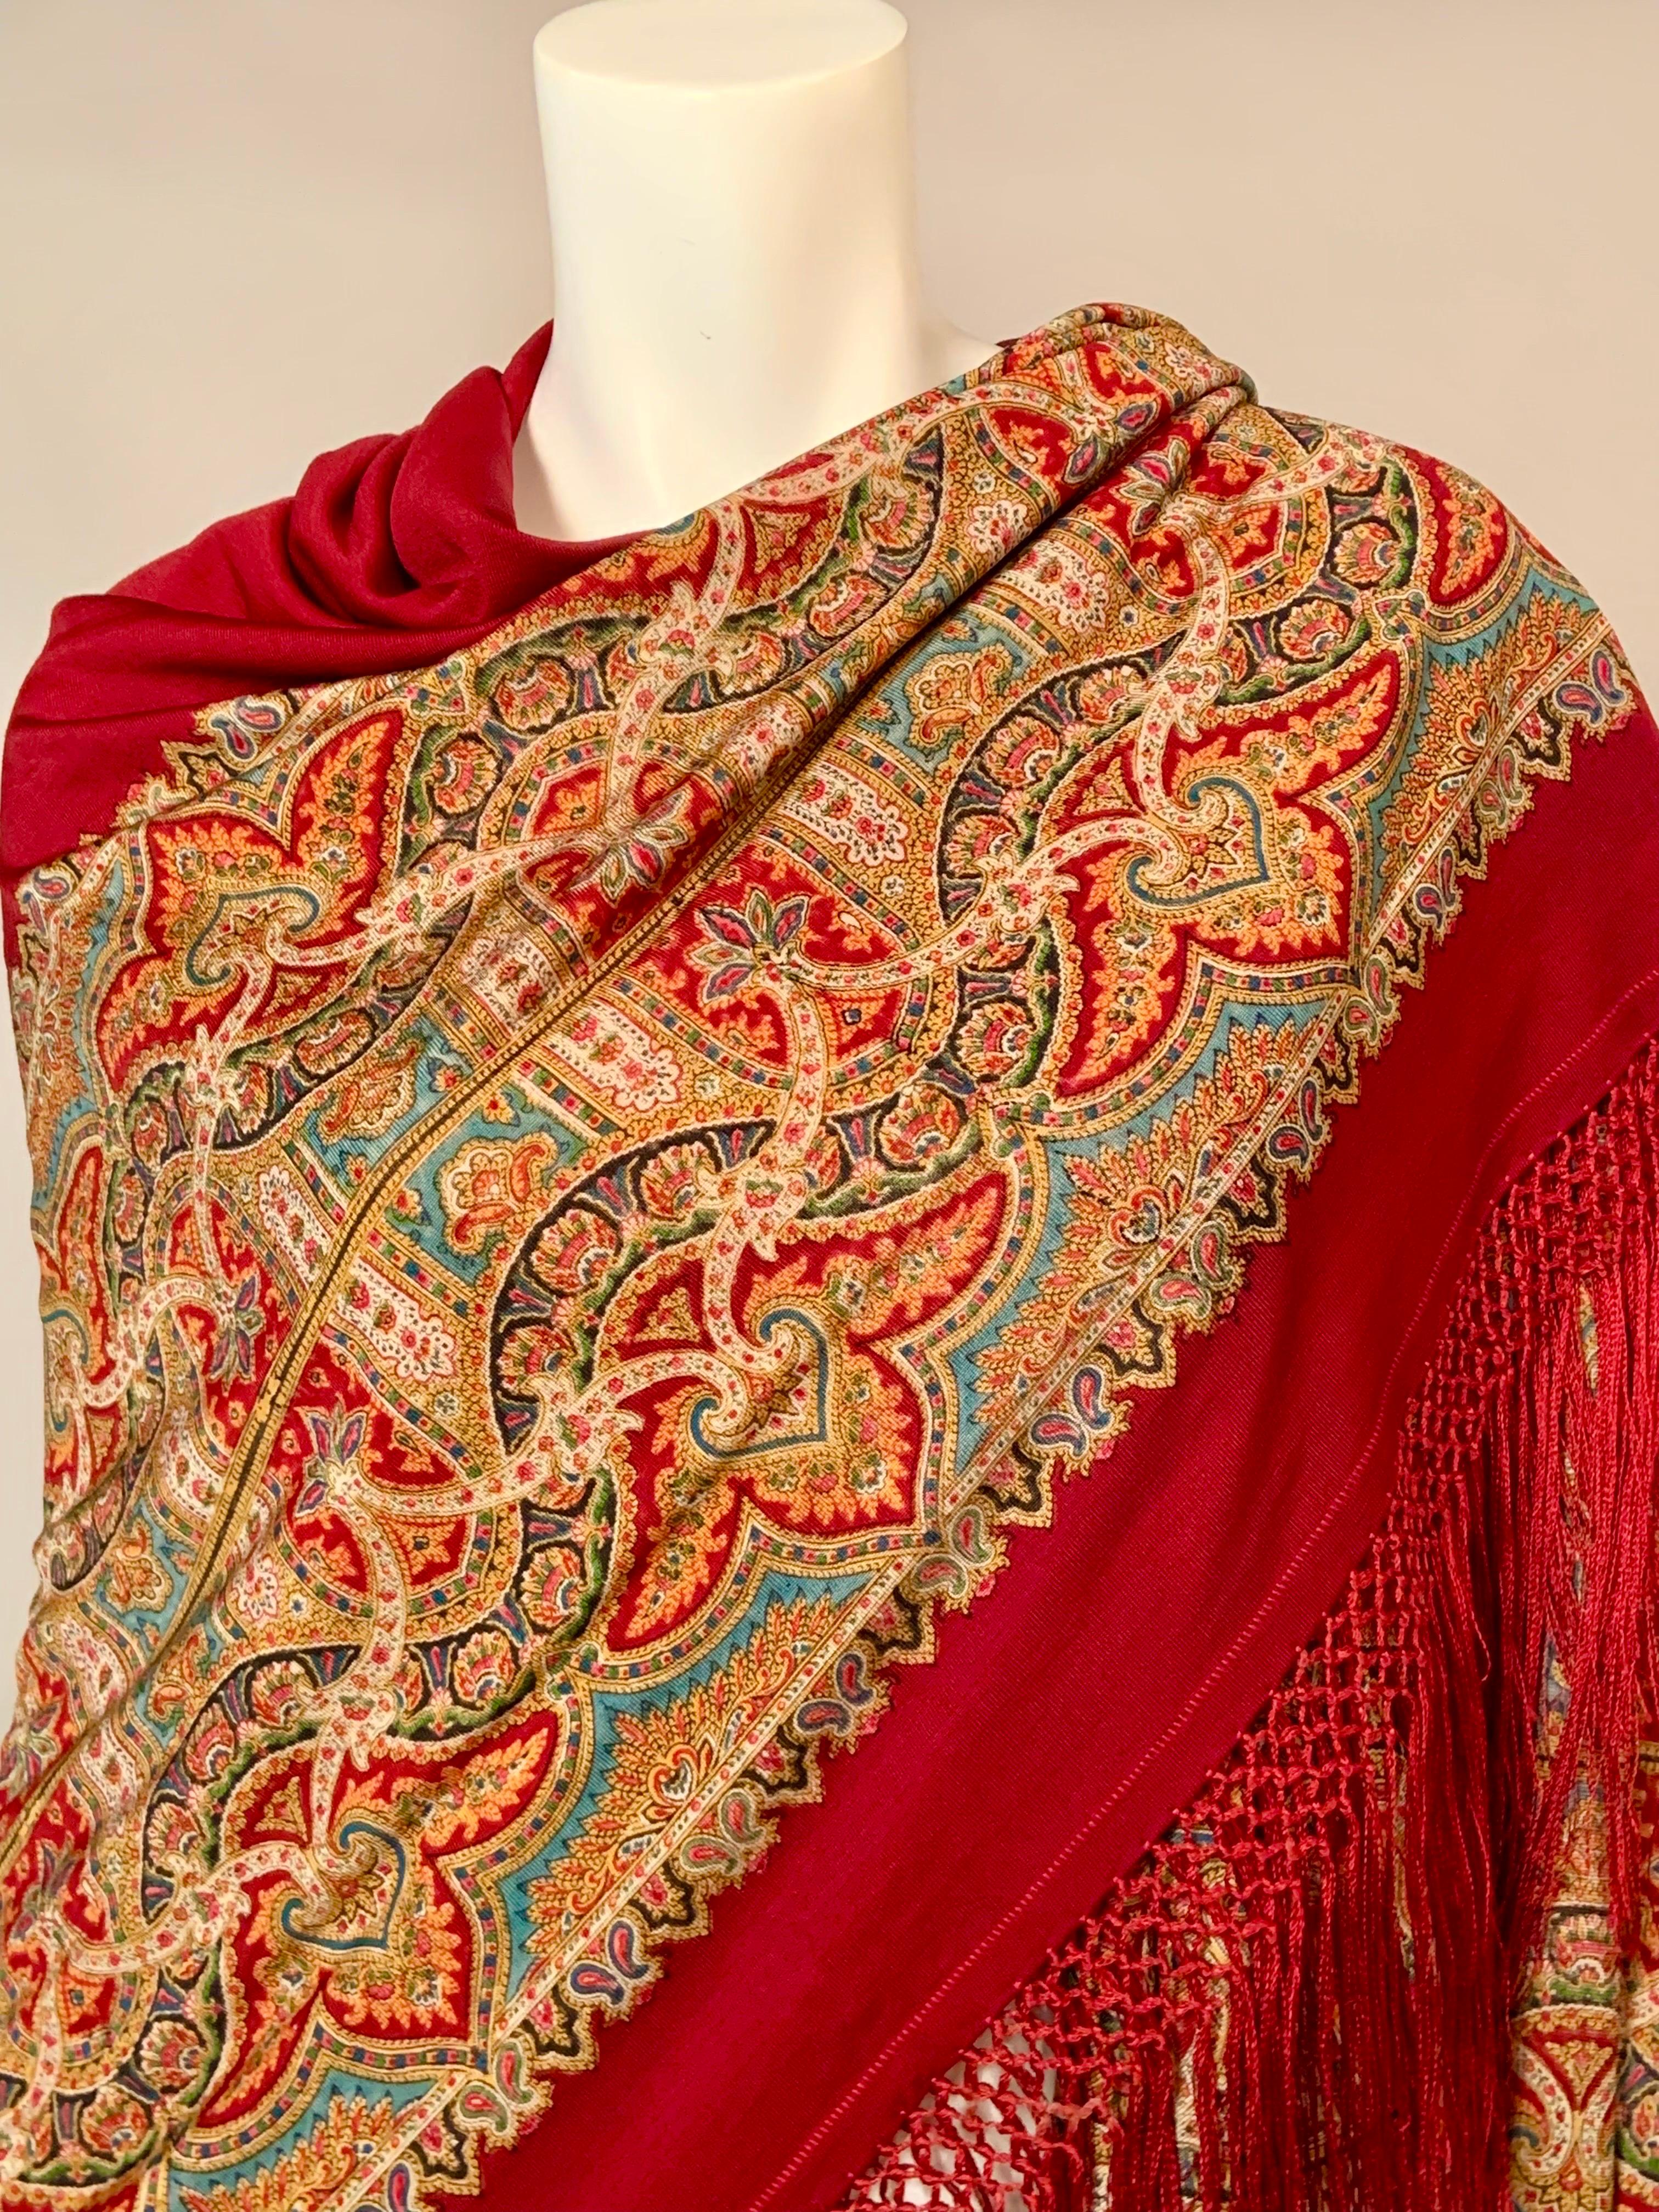 Paisley Printed Burgundy Red Shawl with Silk Fringe In Excellent Condition For Sale In New Hope, PA